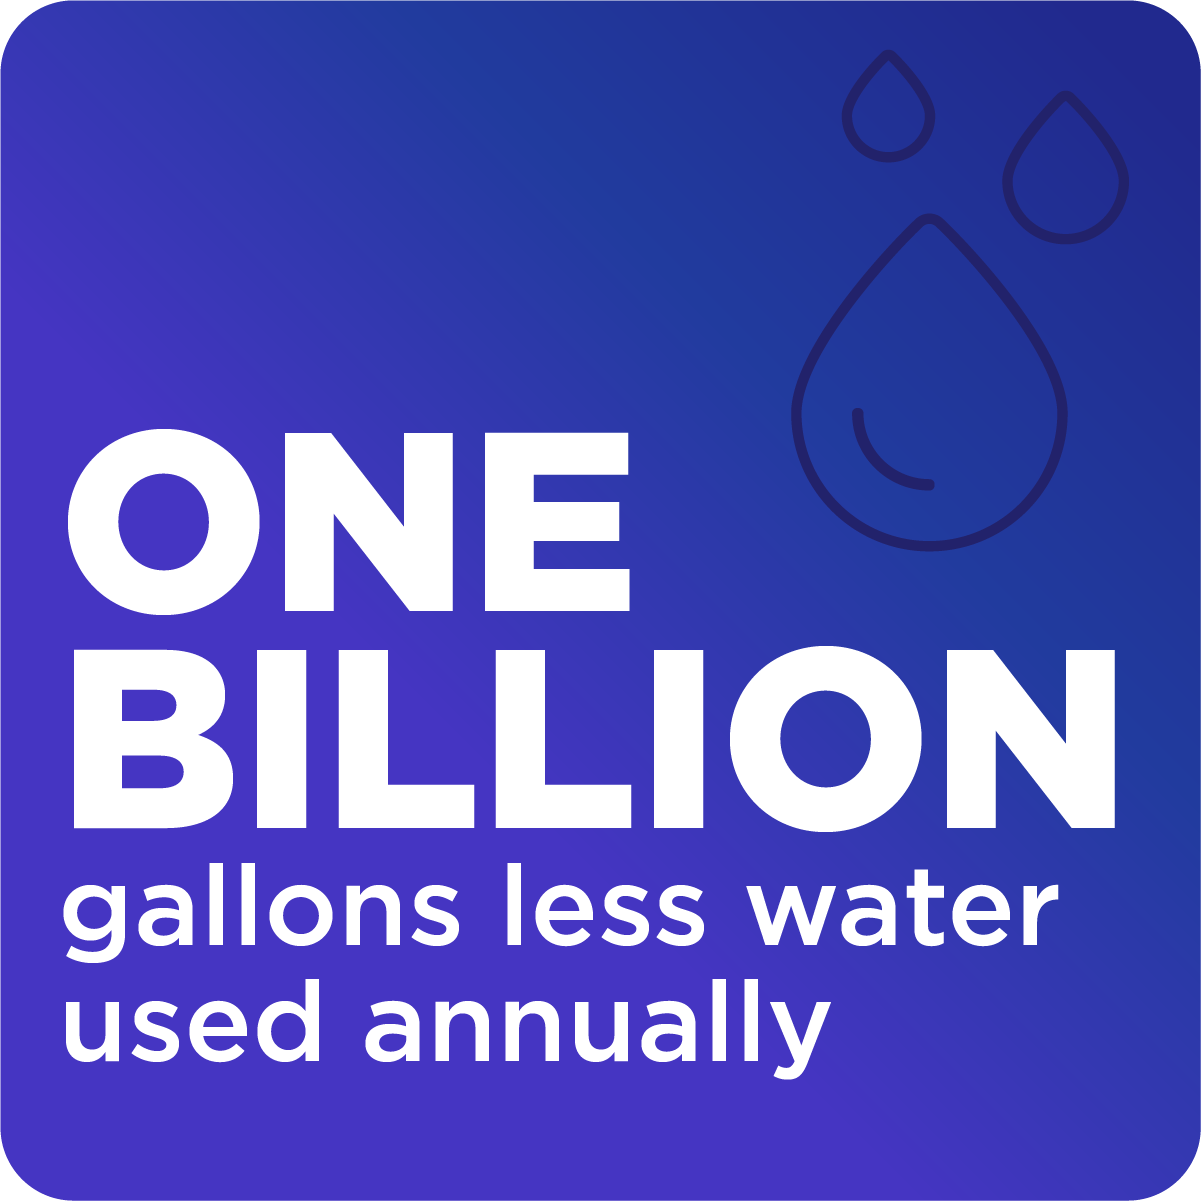 1 billion gallon-per-year reduction in water use